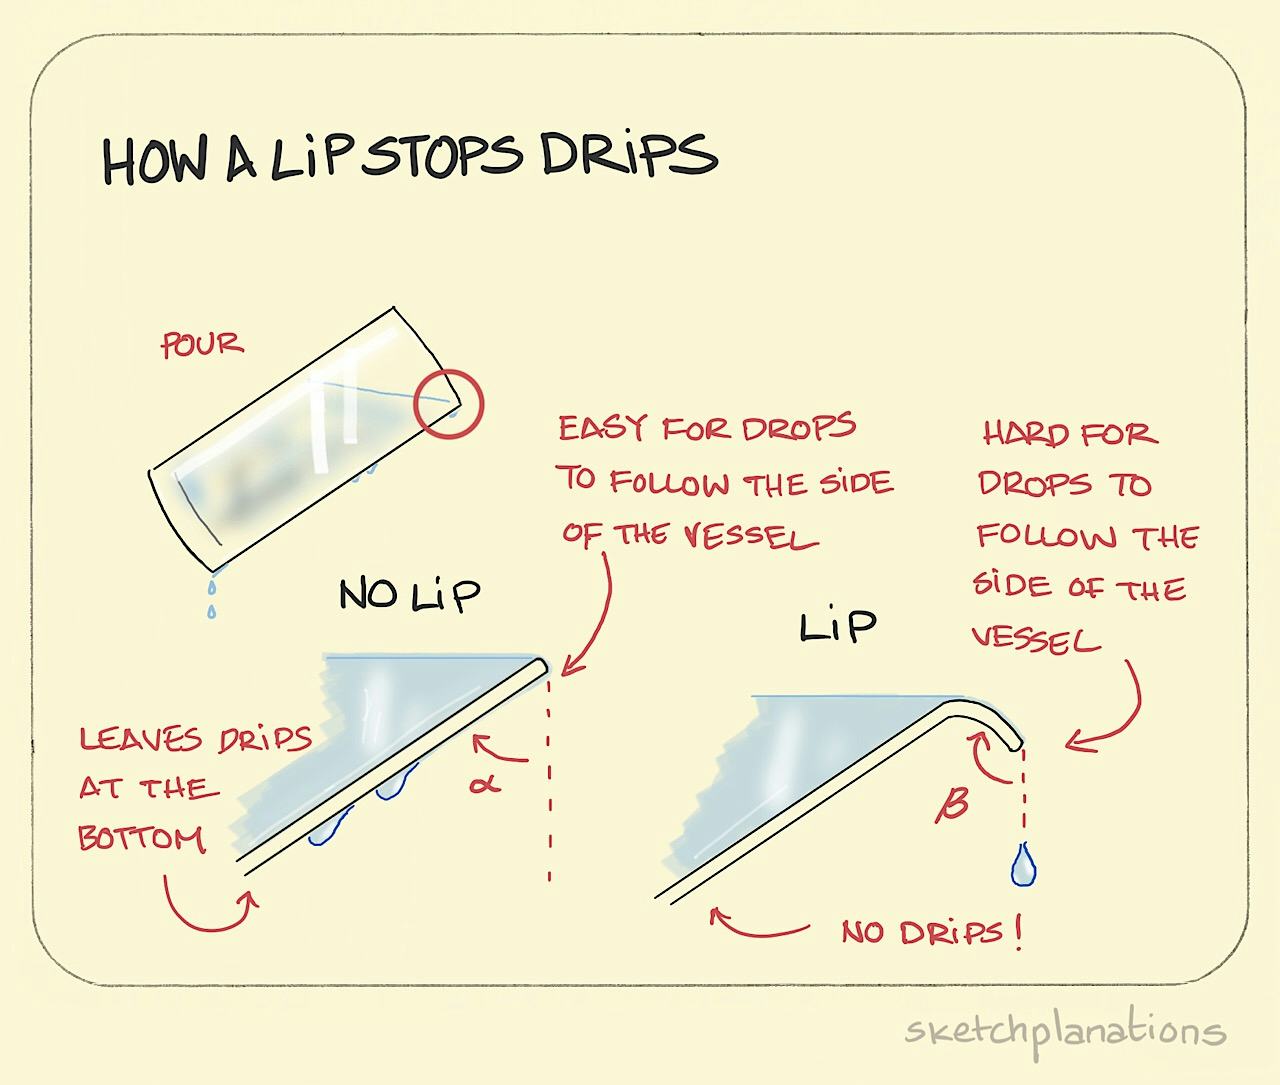 How a lip stops drips. - Sketchplanations